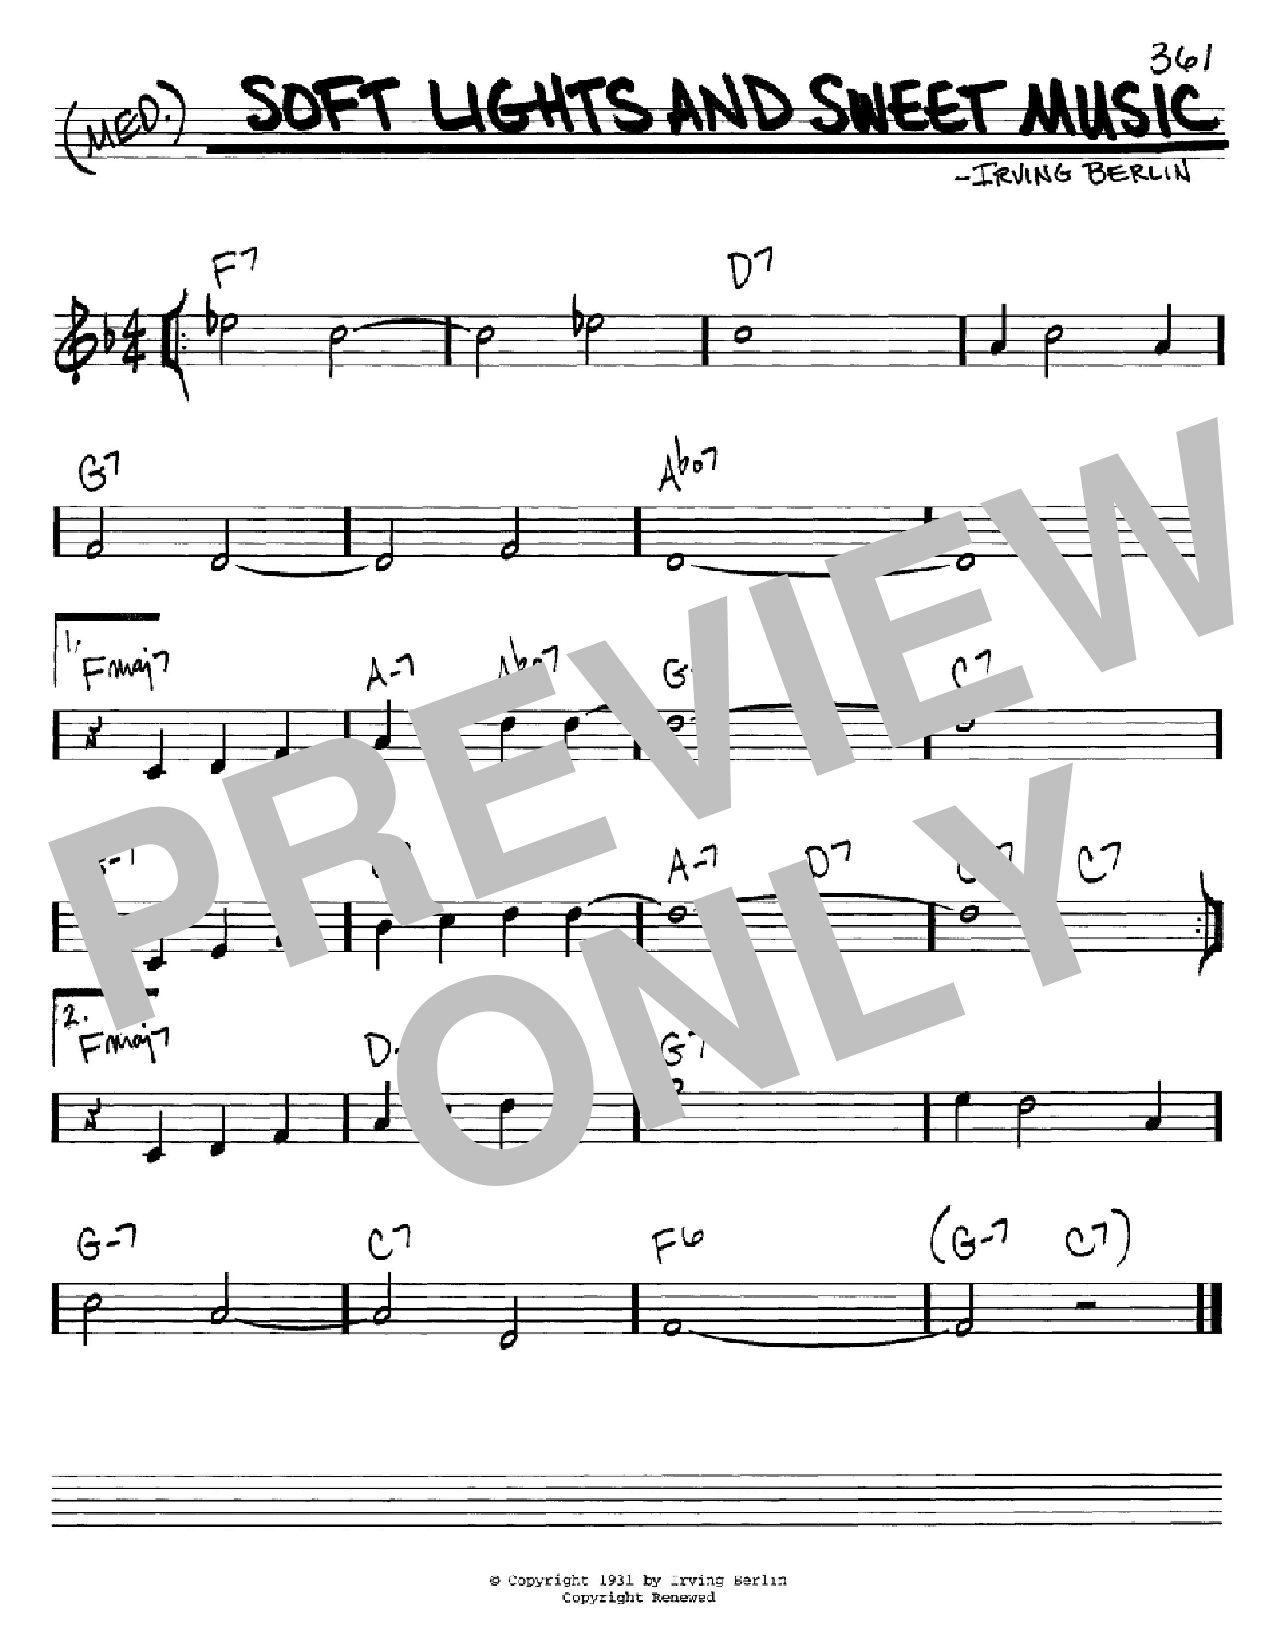 Irving Berlin Soft Lights And Sweet Music sheet music notes and chords. Download Printable PDF.